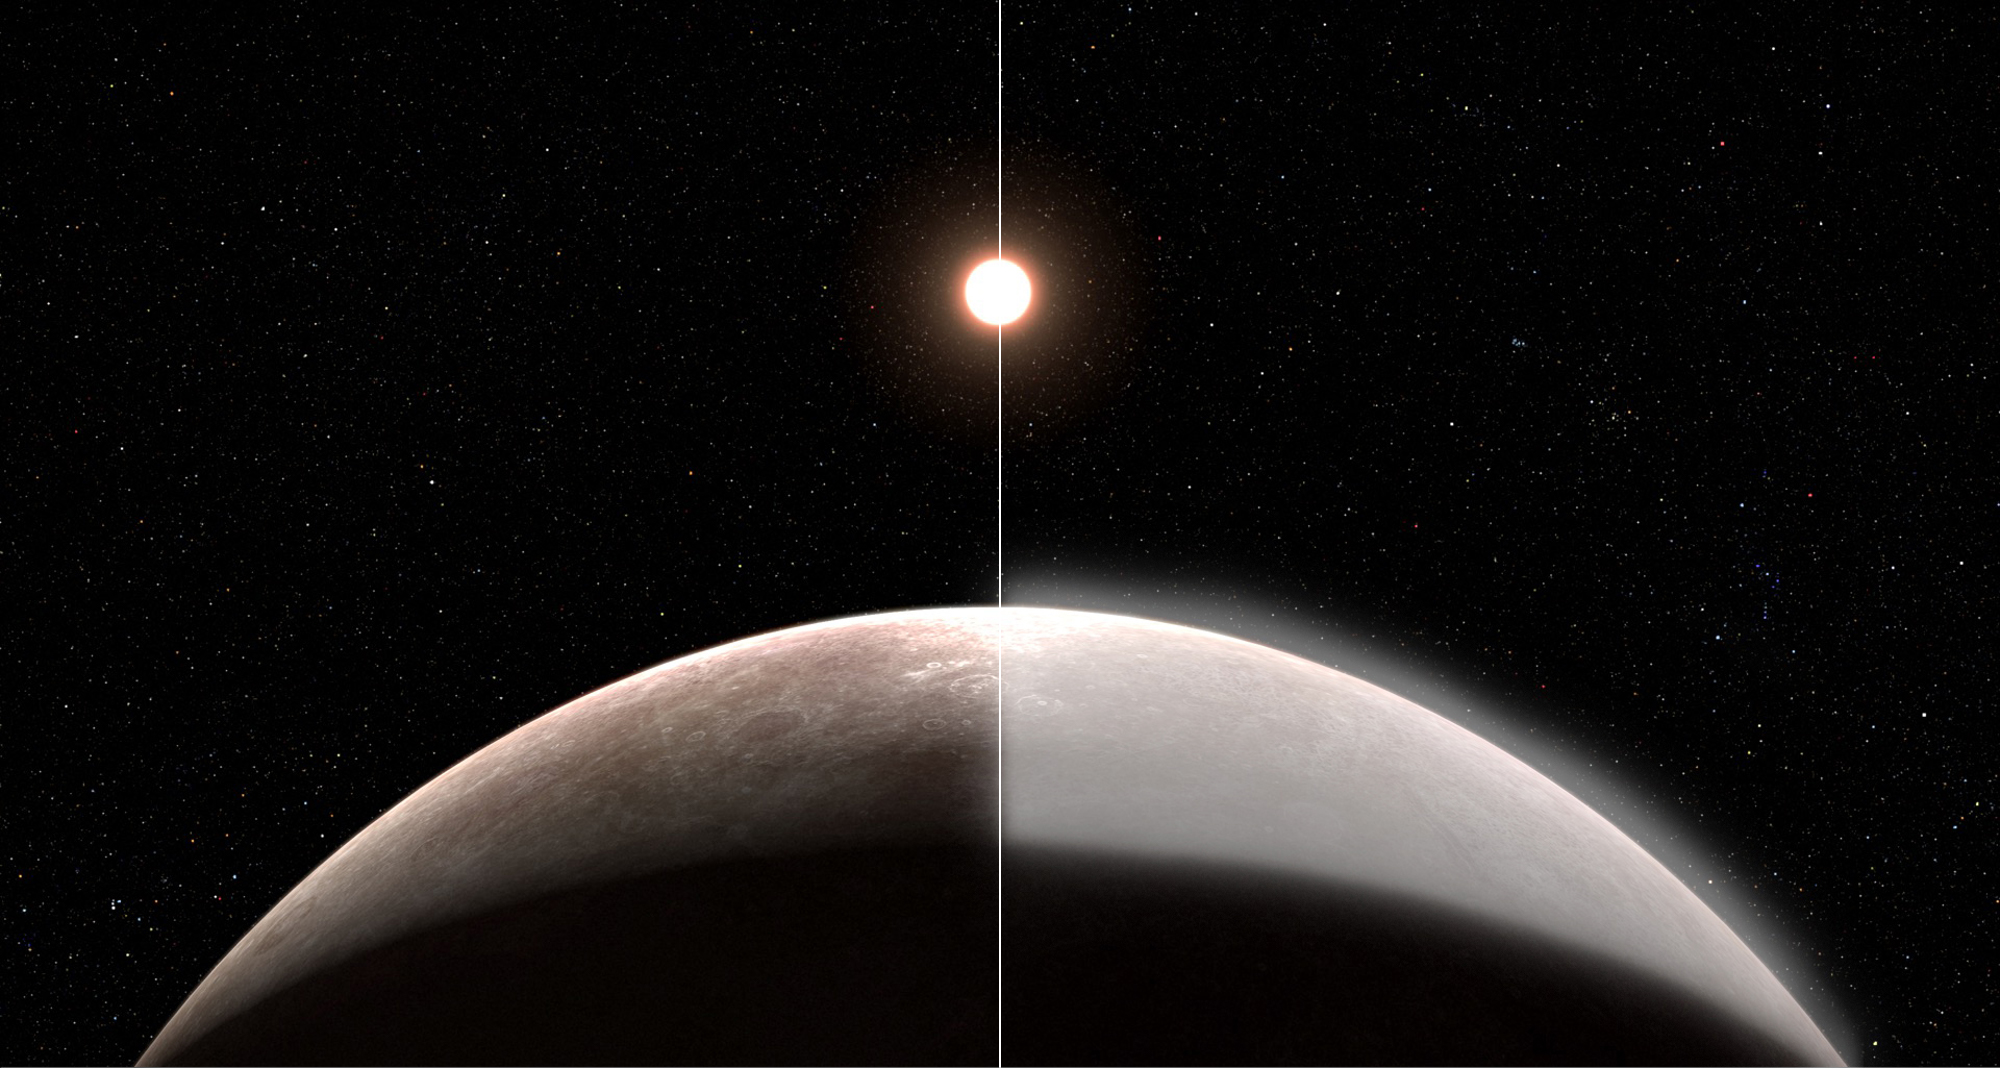 This illustration reflects the uncertainty that remains about the atmosphere of the Earth-sized exoplanet LHS 475b